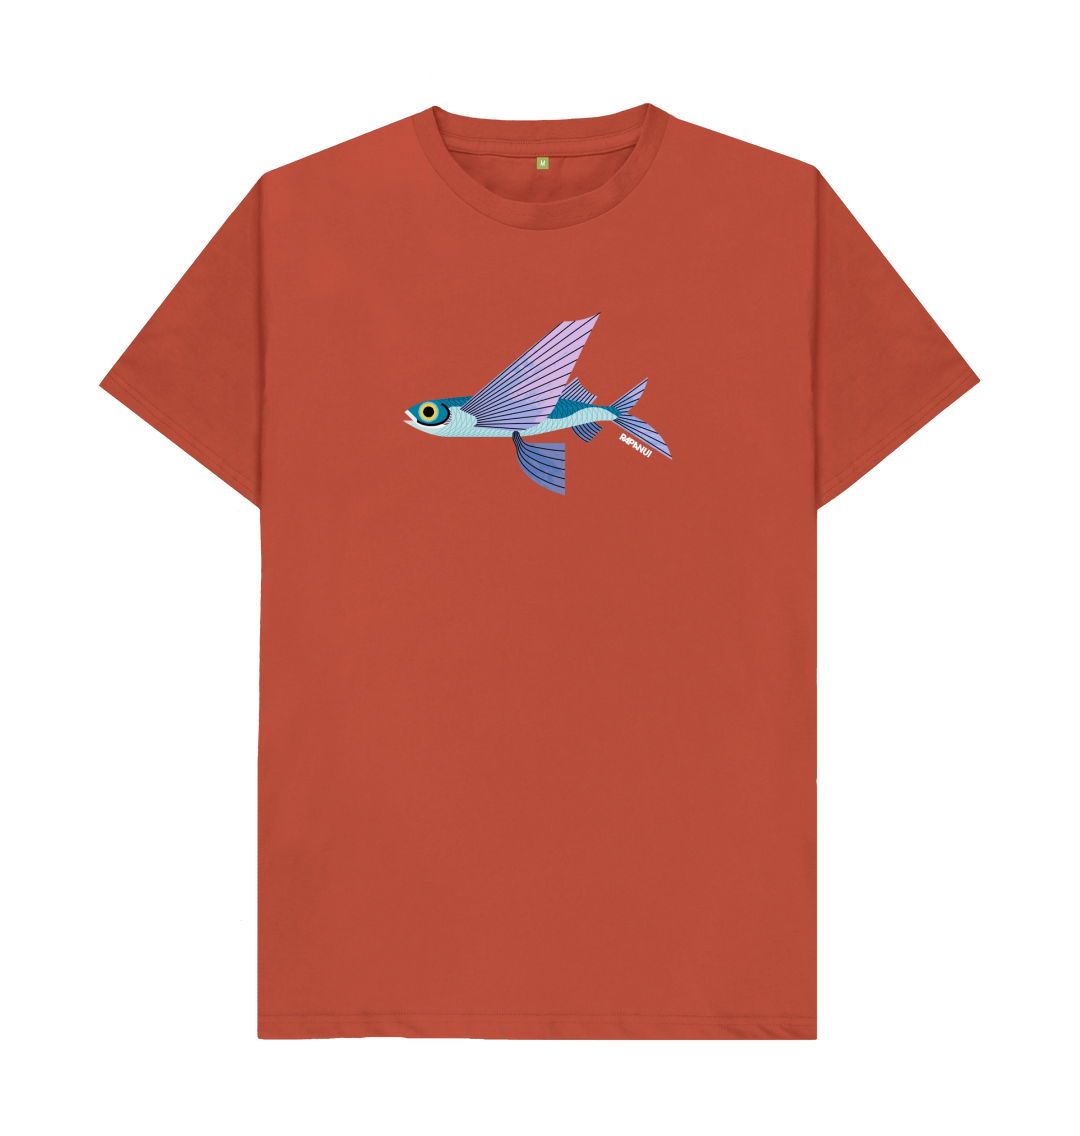 Patagonia Men's Flying Fish Organic T-Shirt – Another Fly Story